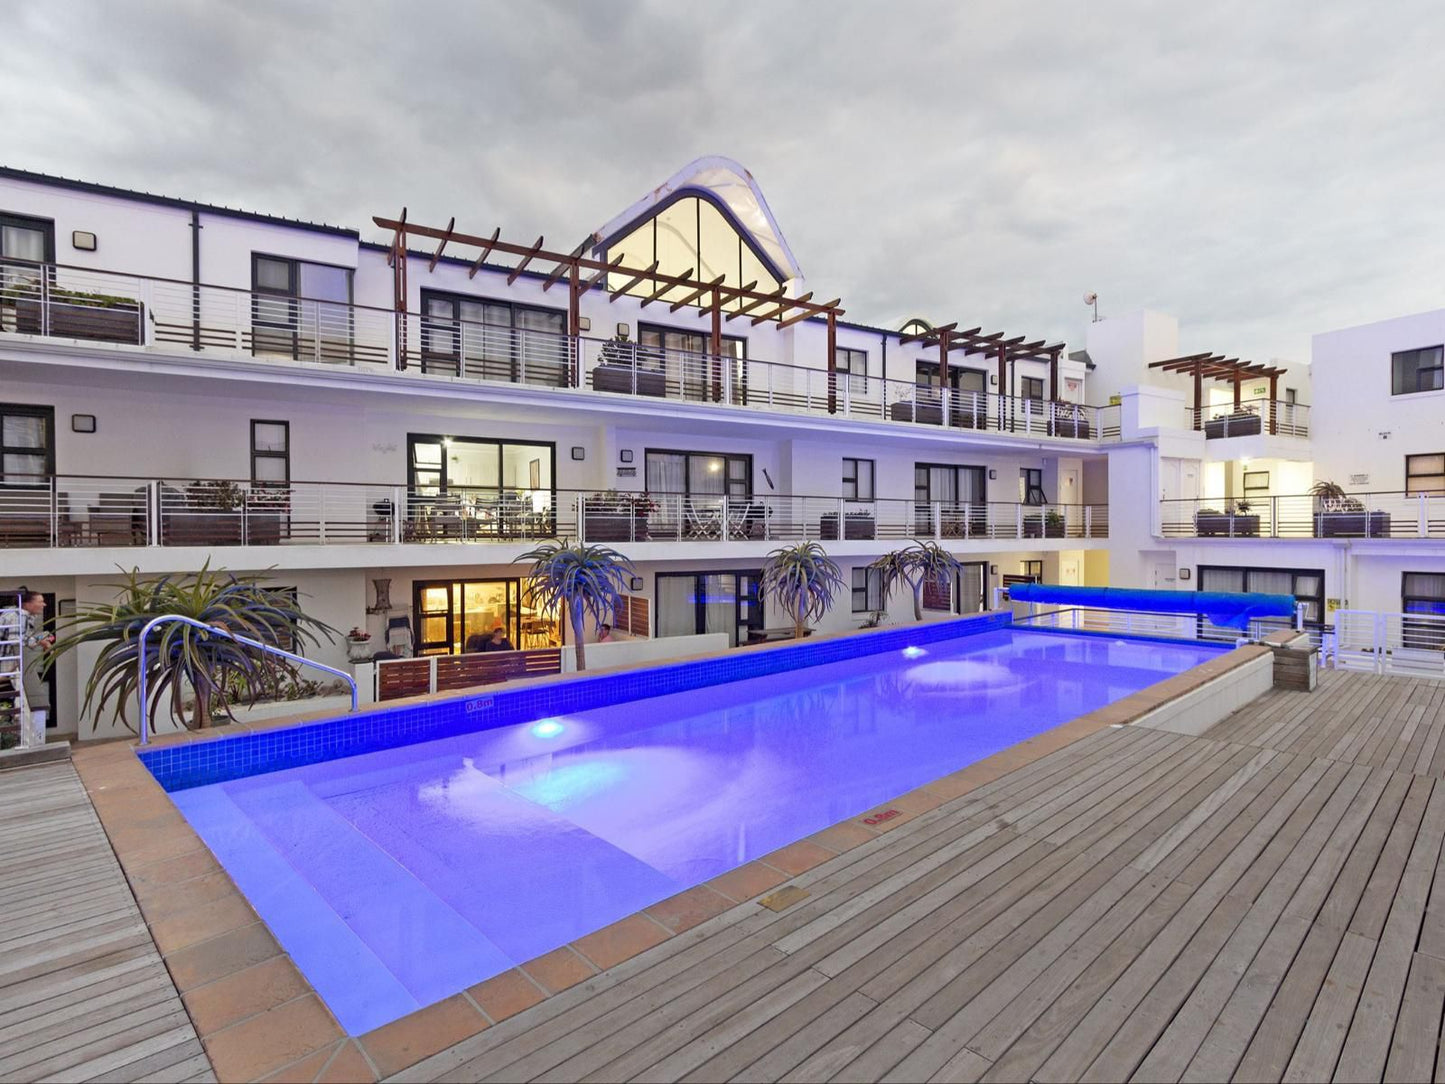 Azure 11 By Hostagents Big Bay Blouberg Western Cape South Africa House, Building, Architecture, Swimming Pool